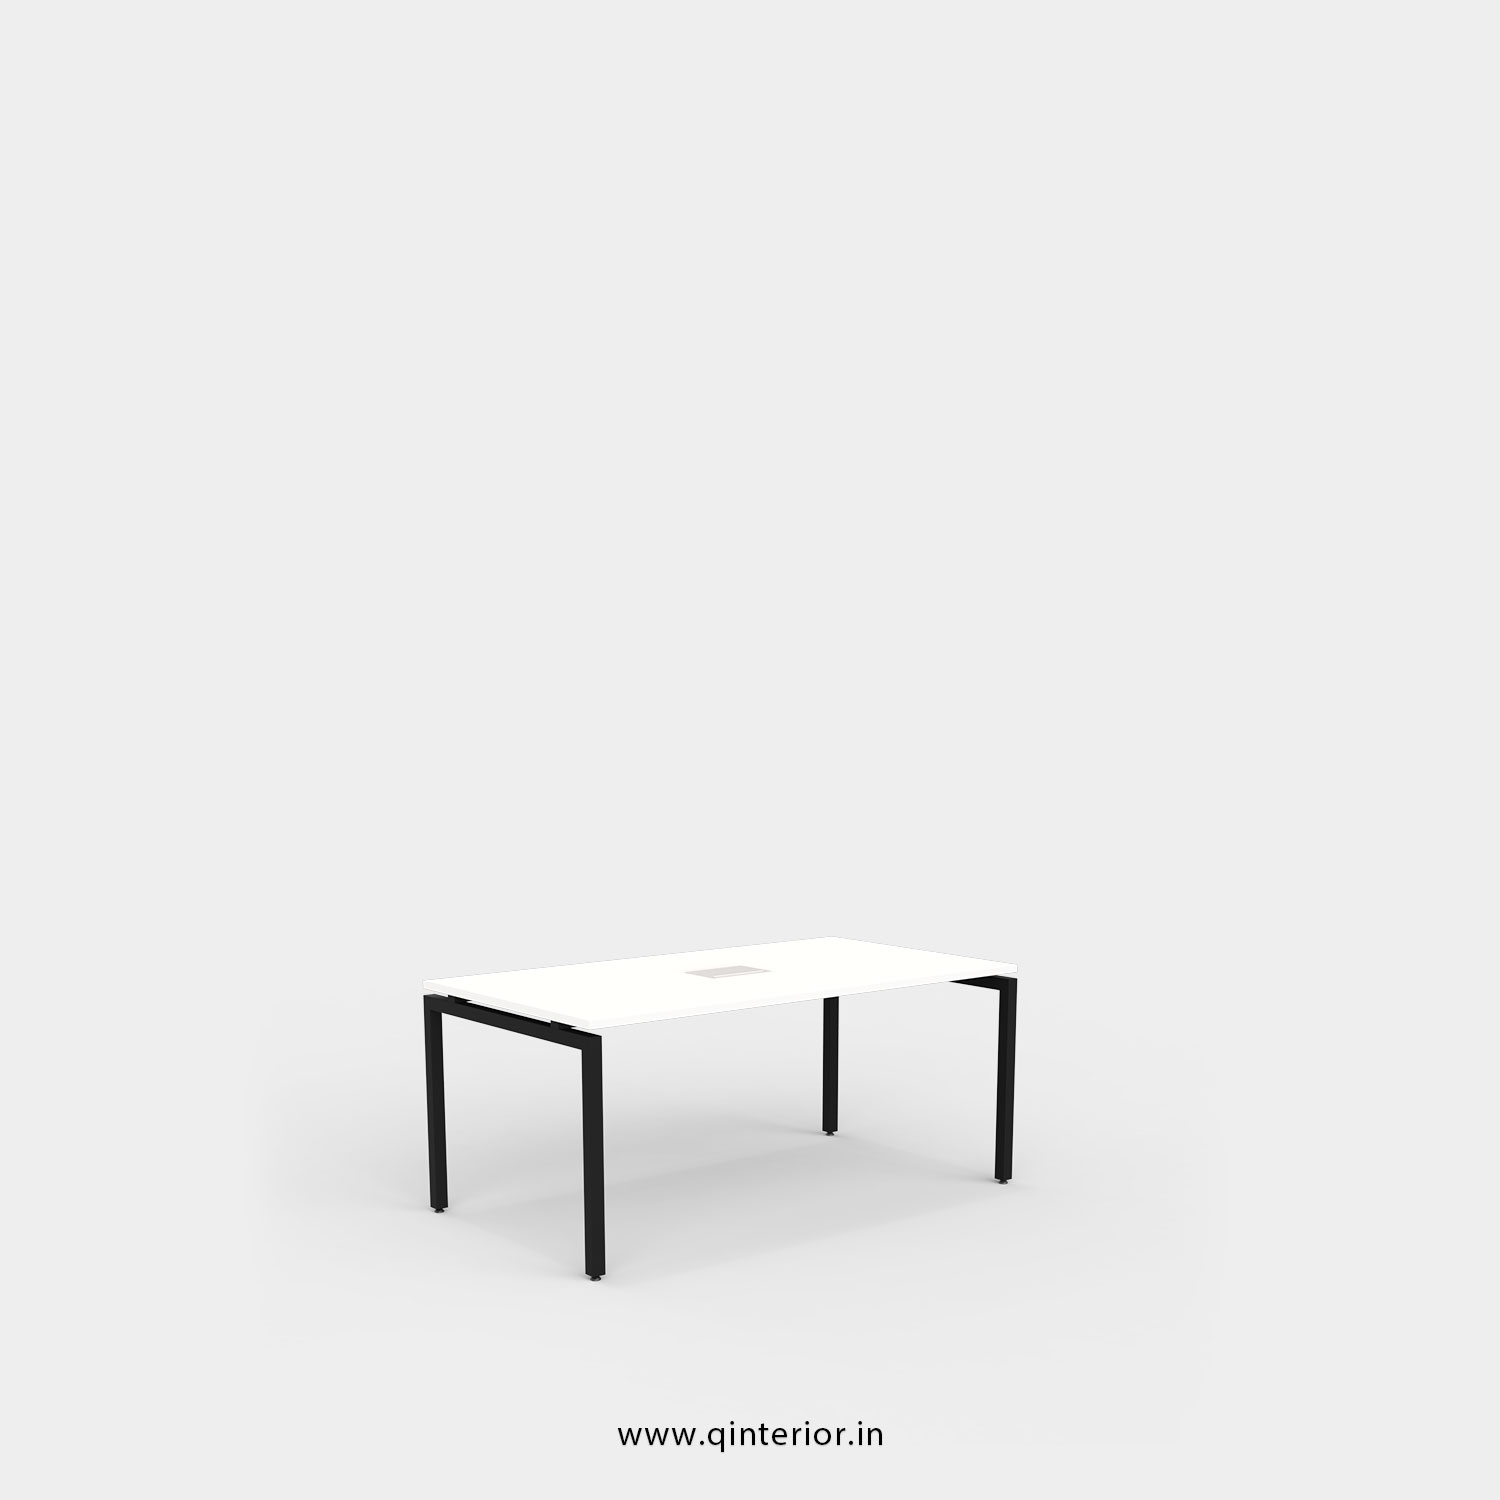 Montel Meeting Table in White Finish - OMT001 C4